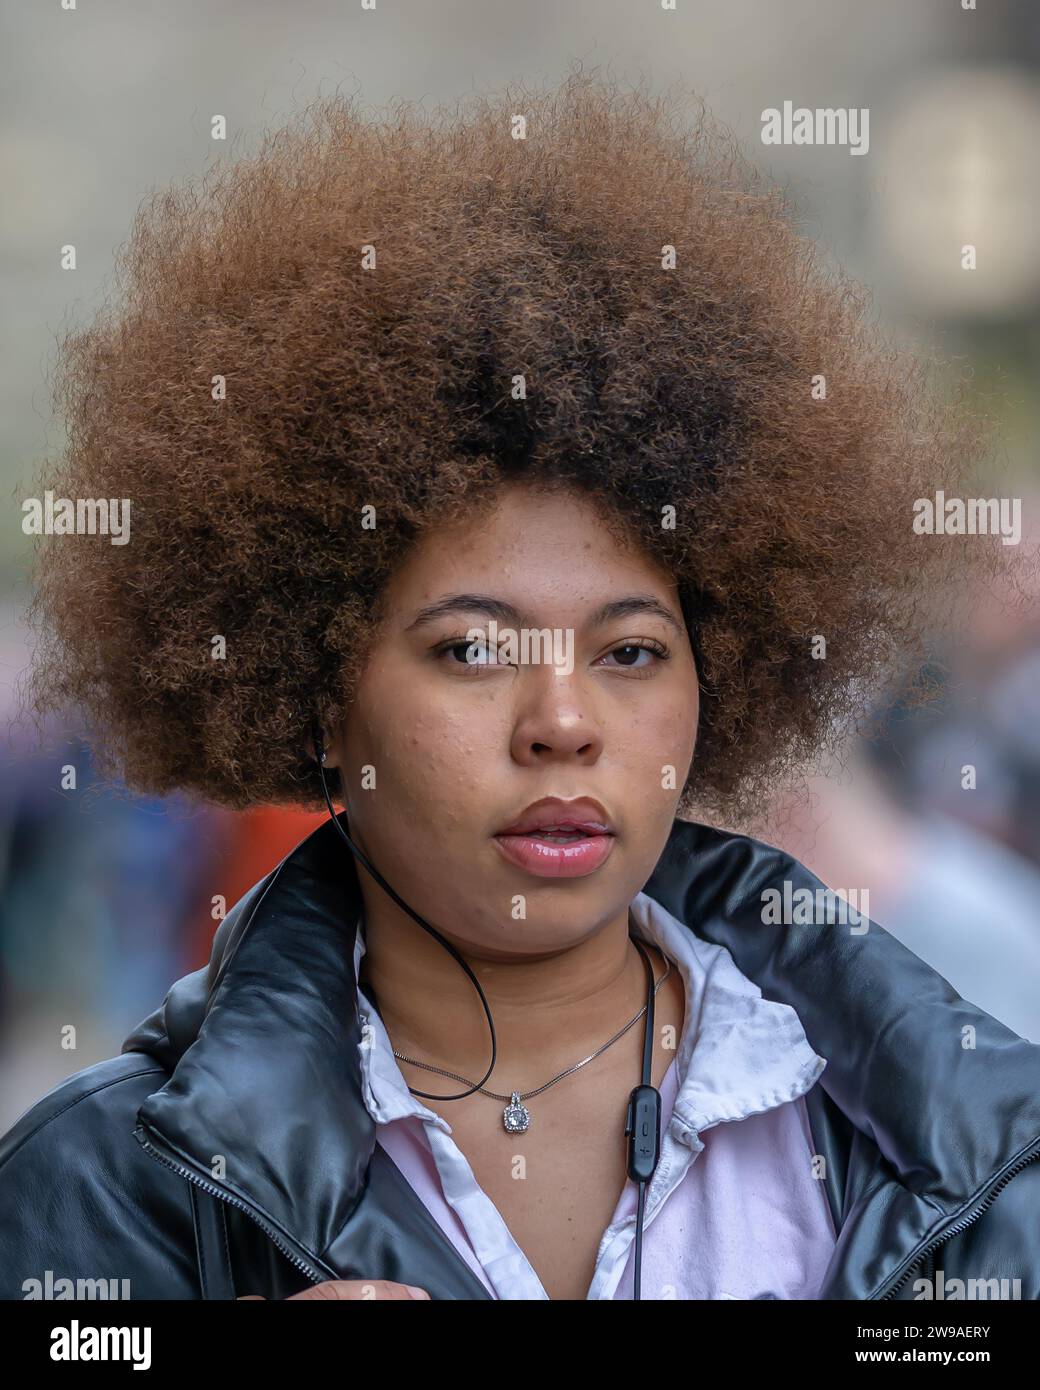 Black lady with afro hair Stock Photo